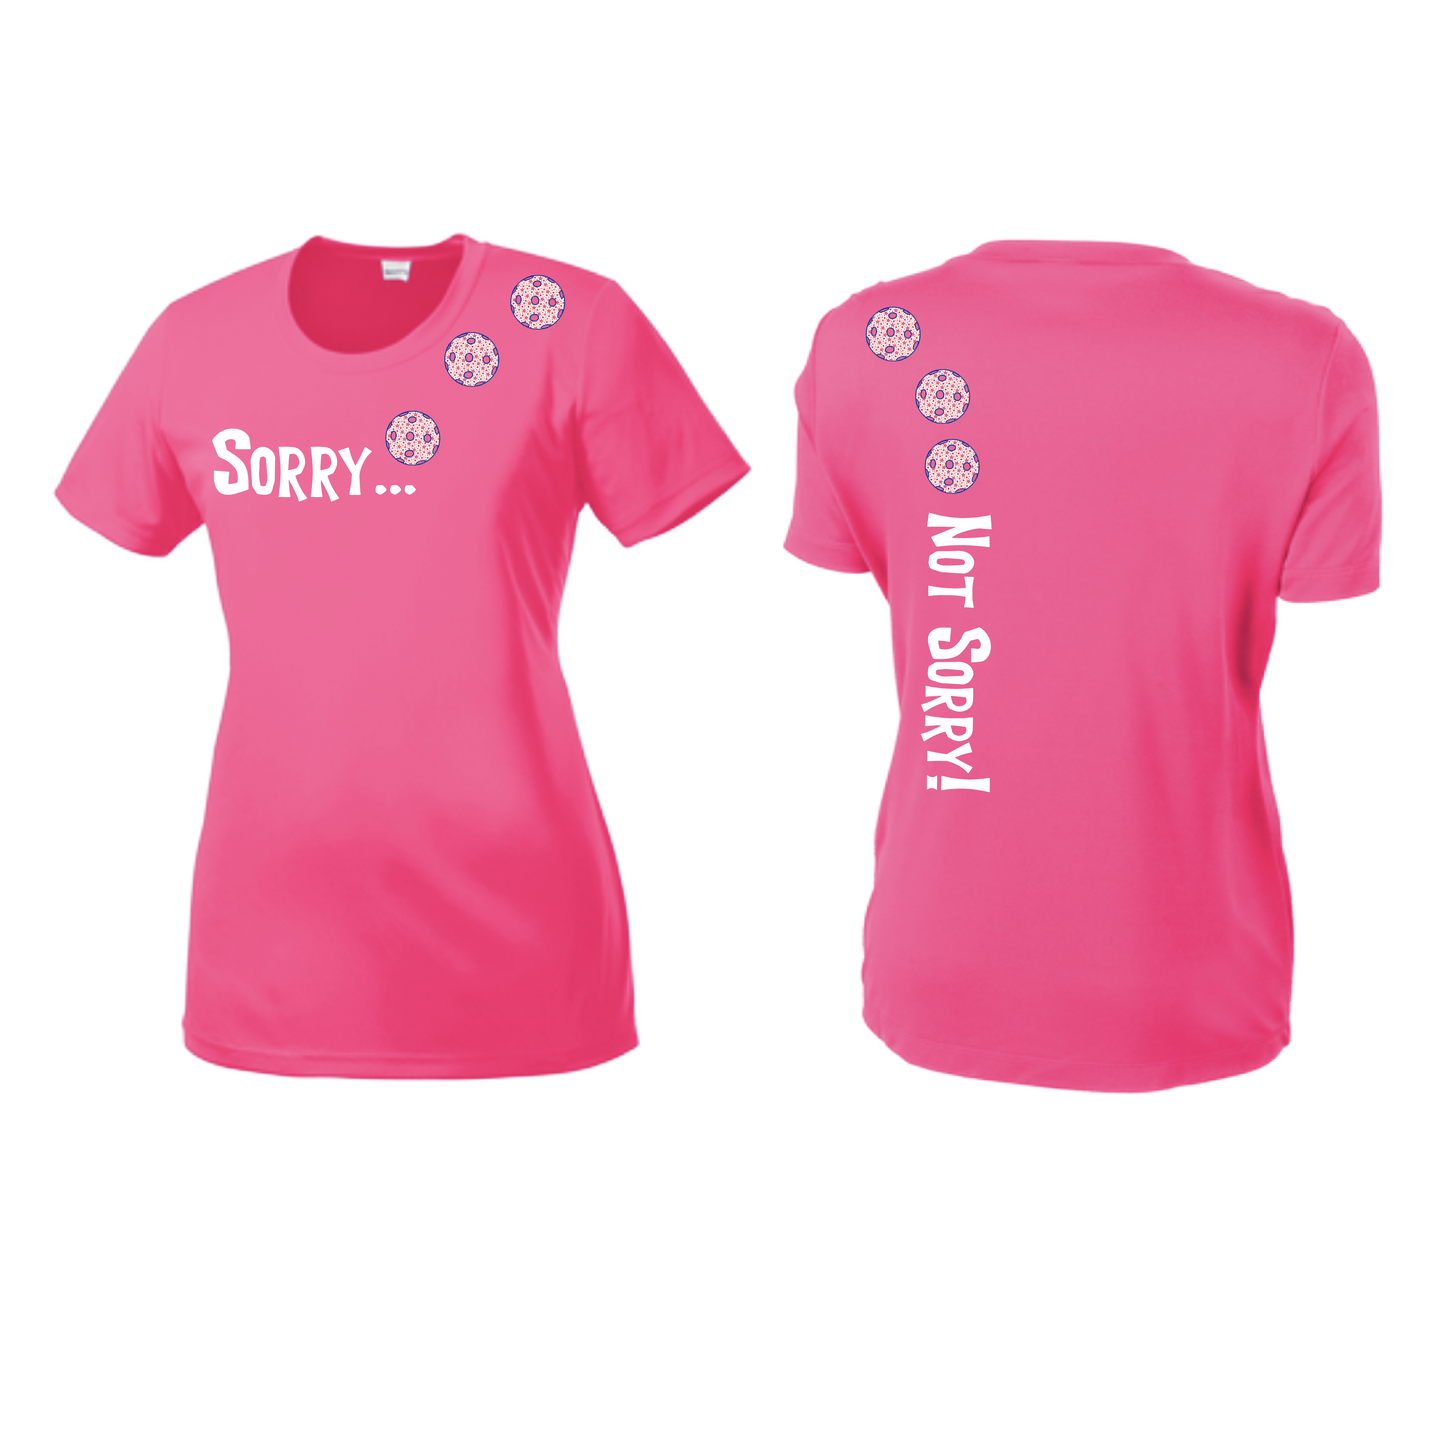 Sorry Not Sorry With Pickleballs (Patriotic Stars) Customizable | Women’s Short Sleeve Crewneck Athletic Shirts | 100% Polyester